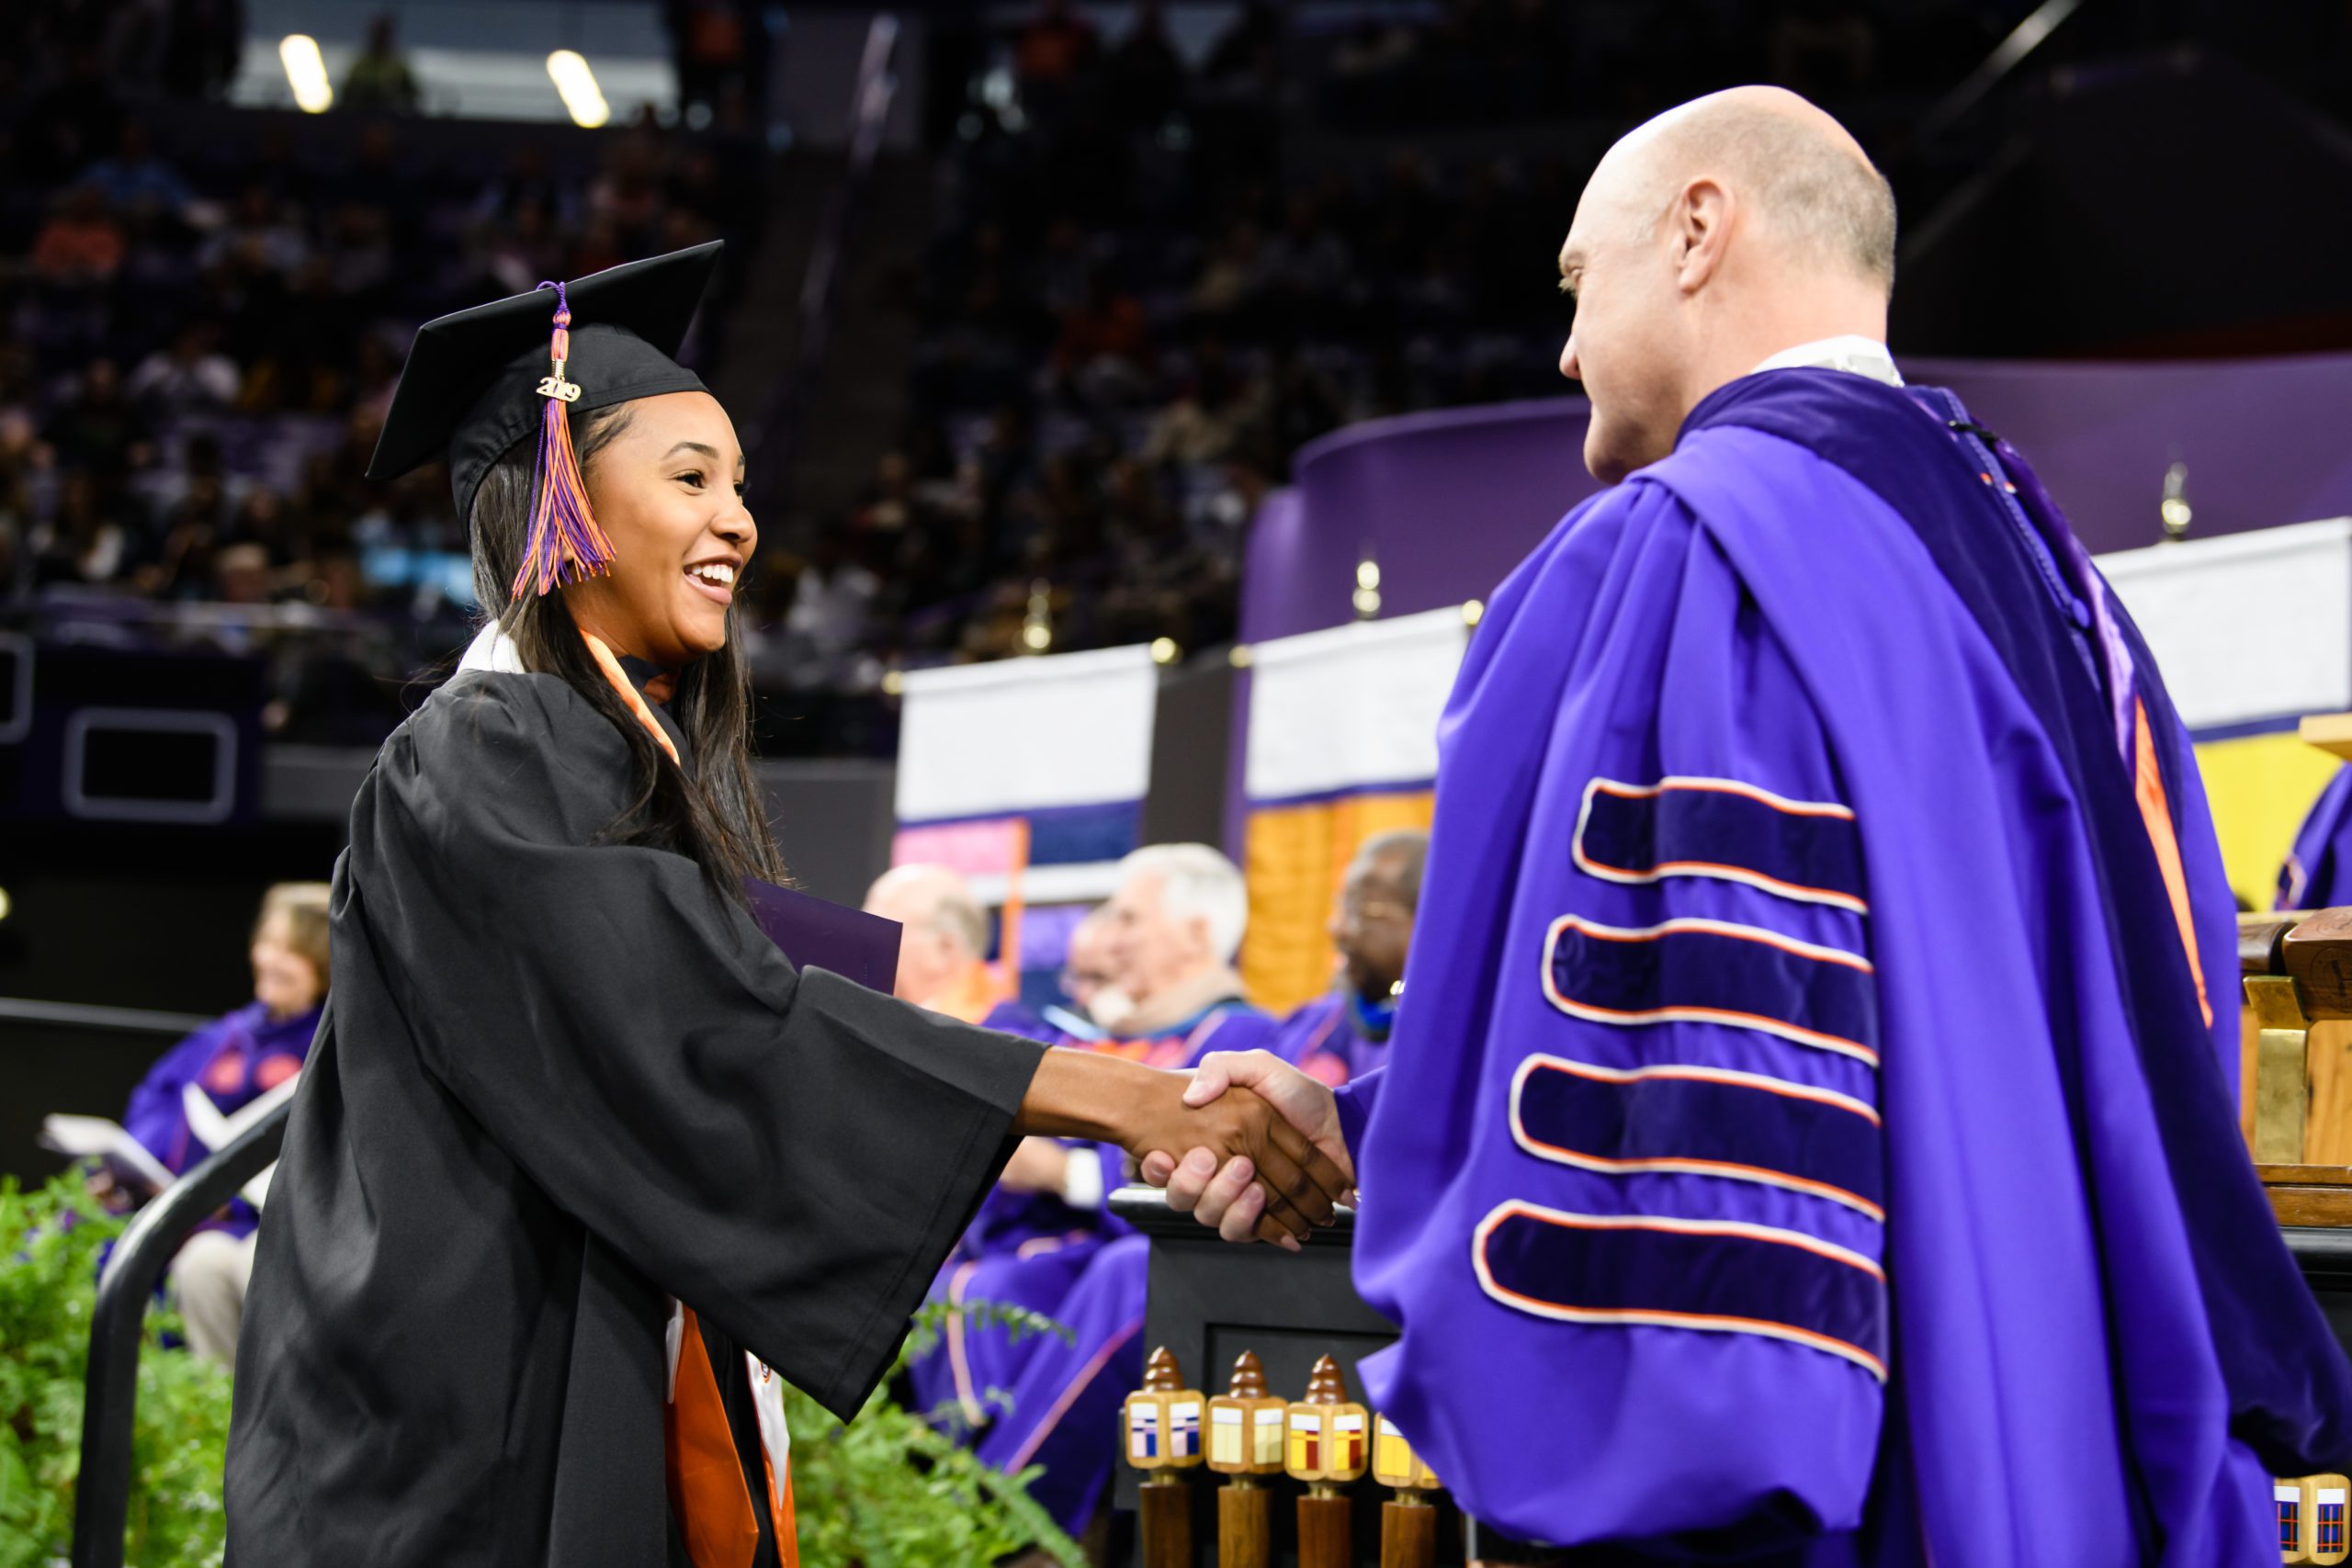 President Clements on stage at graduation shaking hands with a female student graduating.